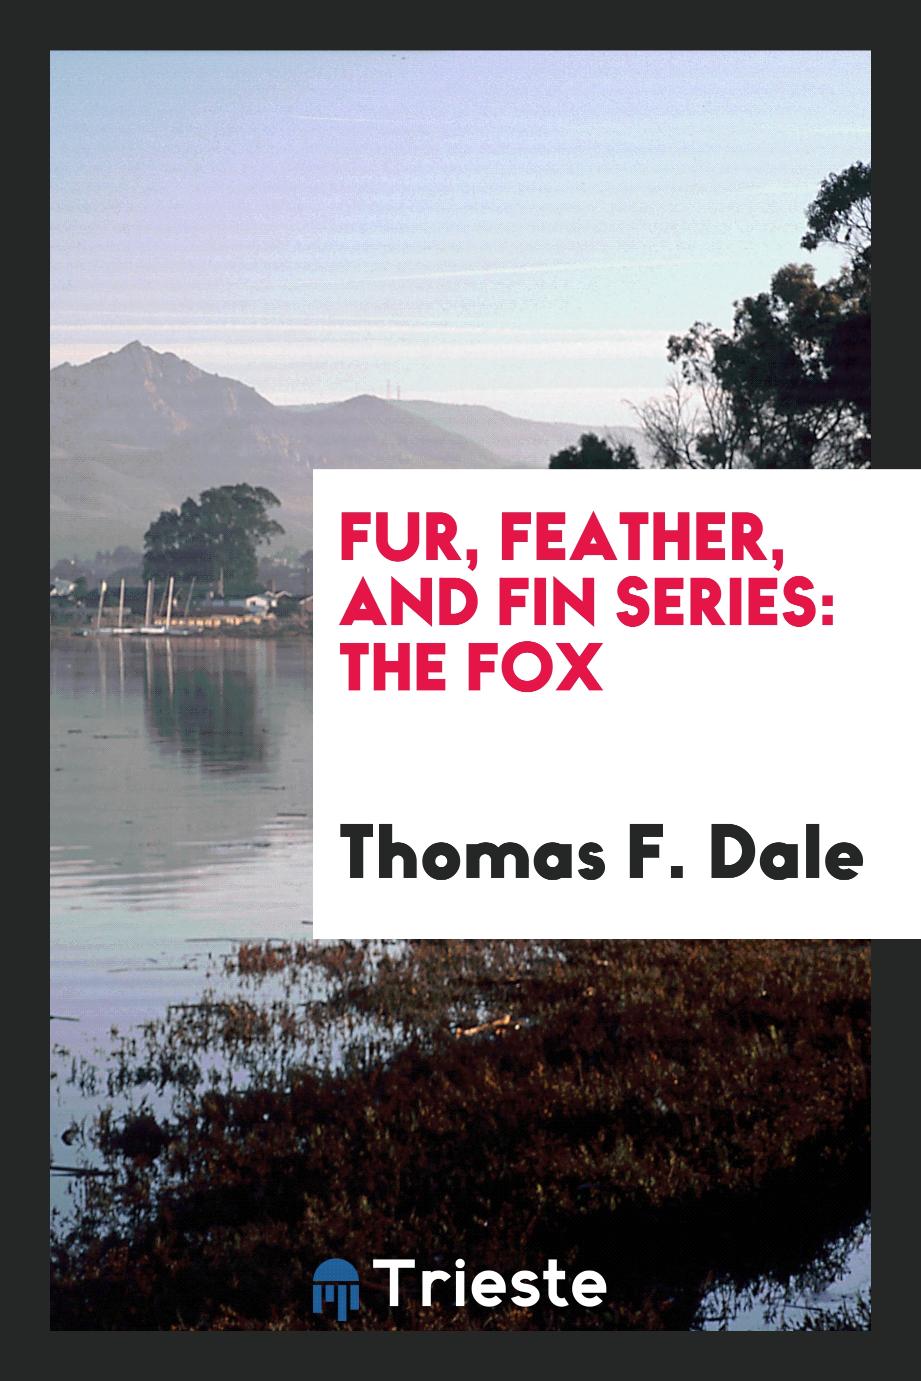 Fur, feather, and Fin series: The fox